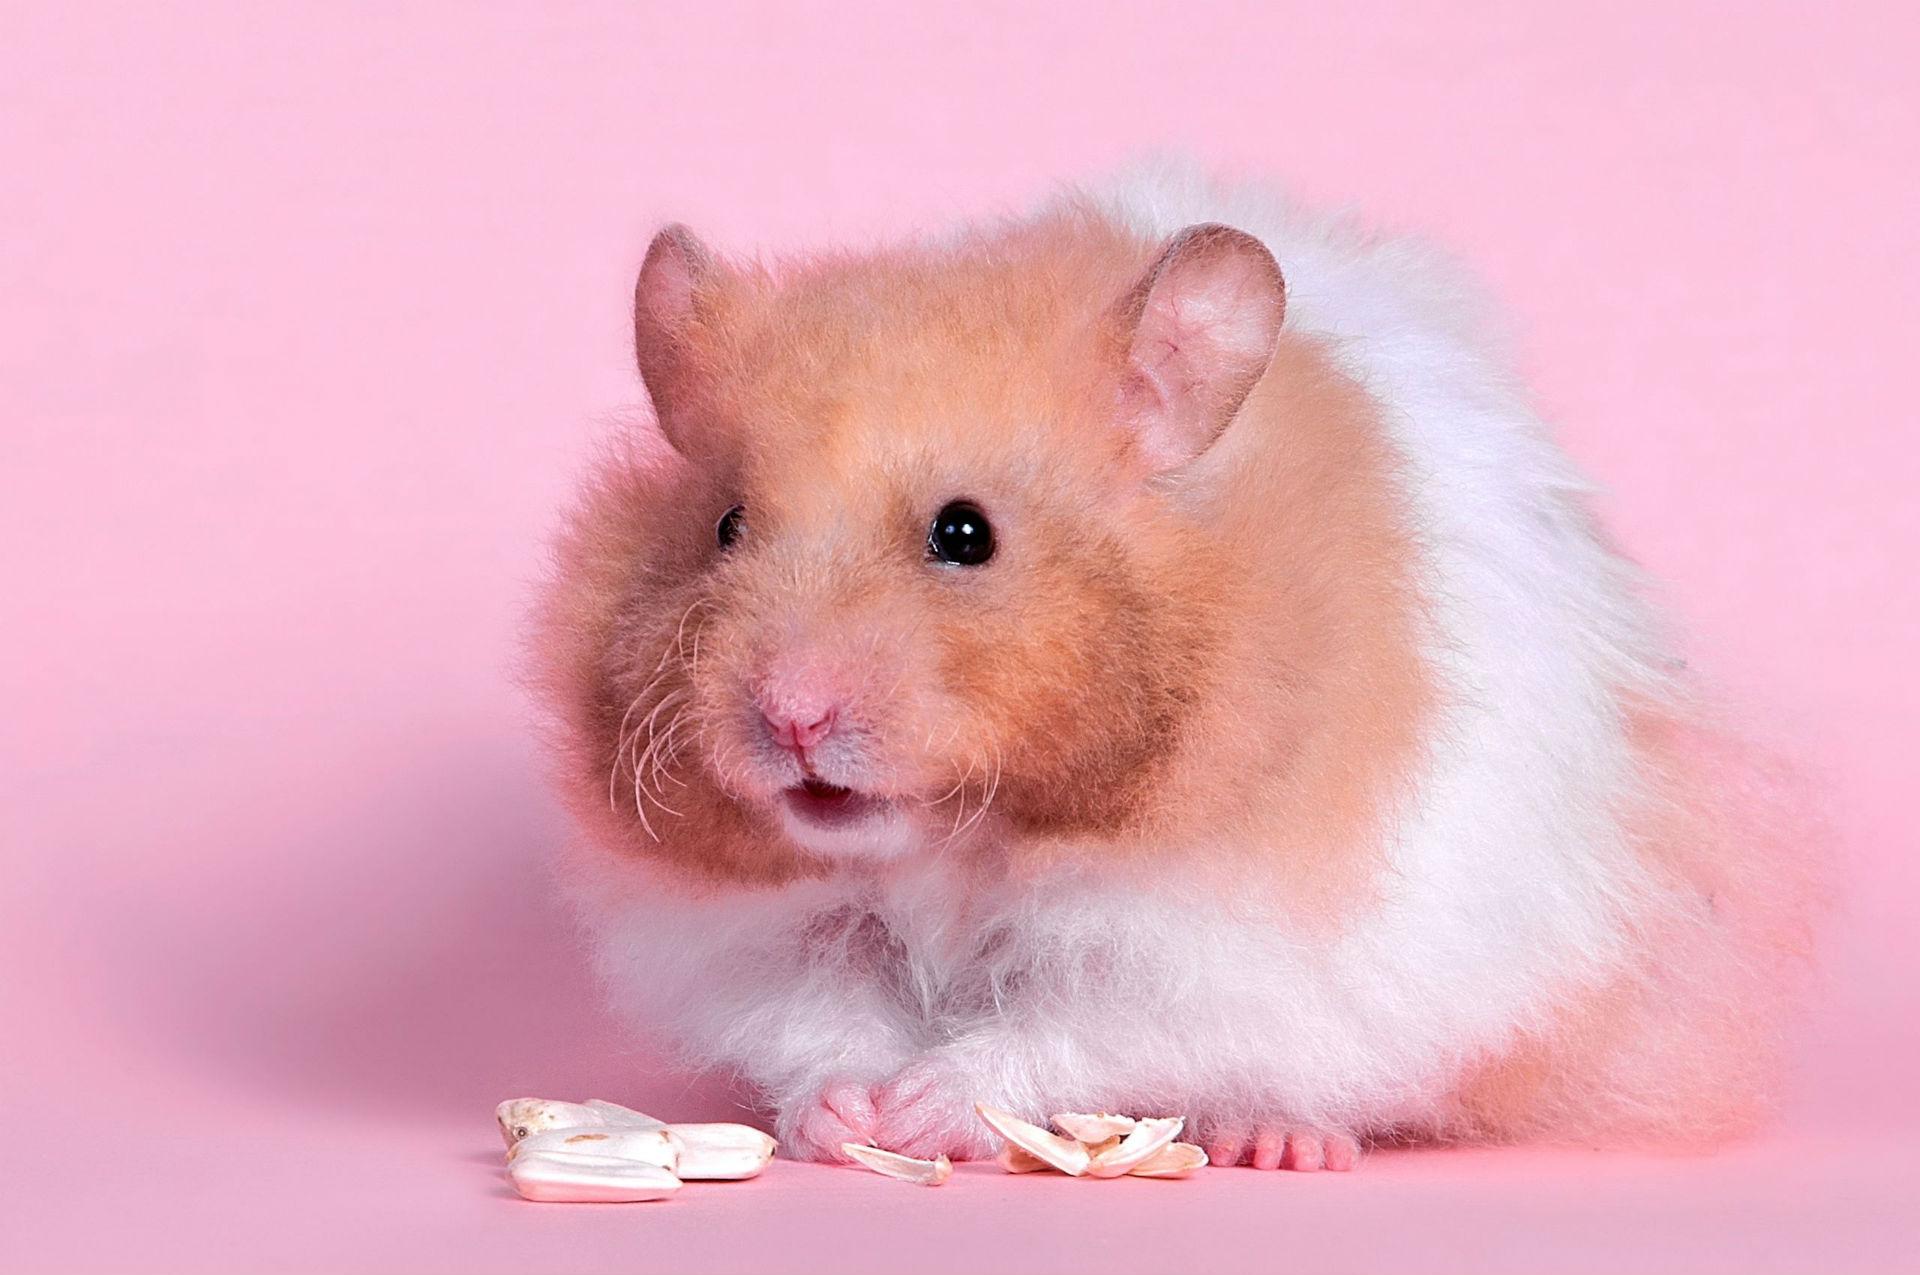 Hamster Quality HD Wallpaper, G.sFDcY